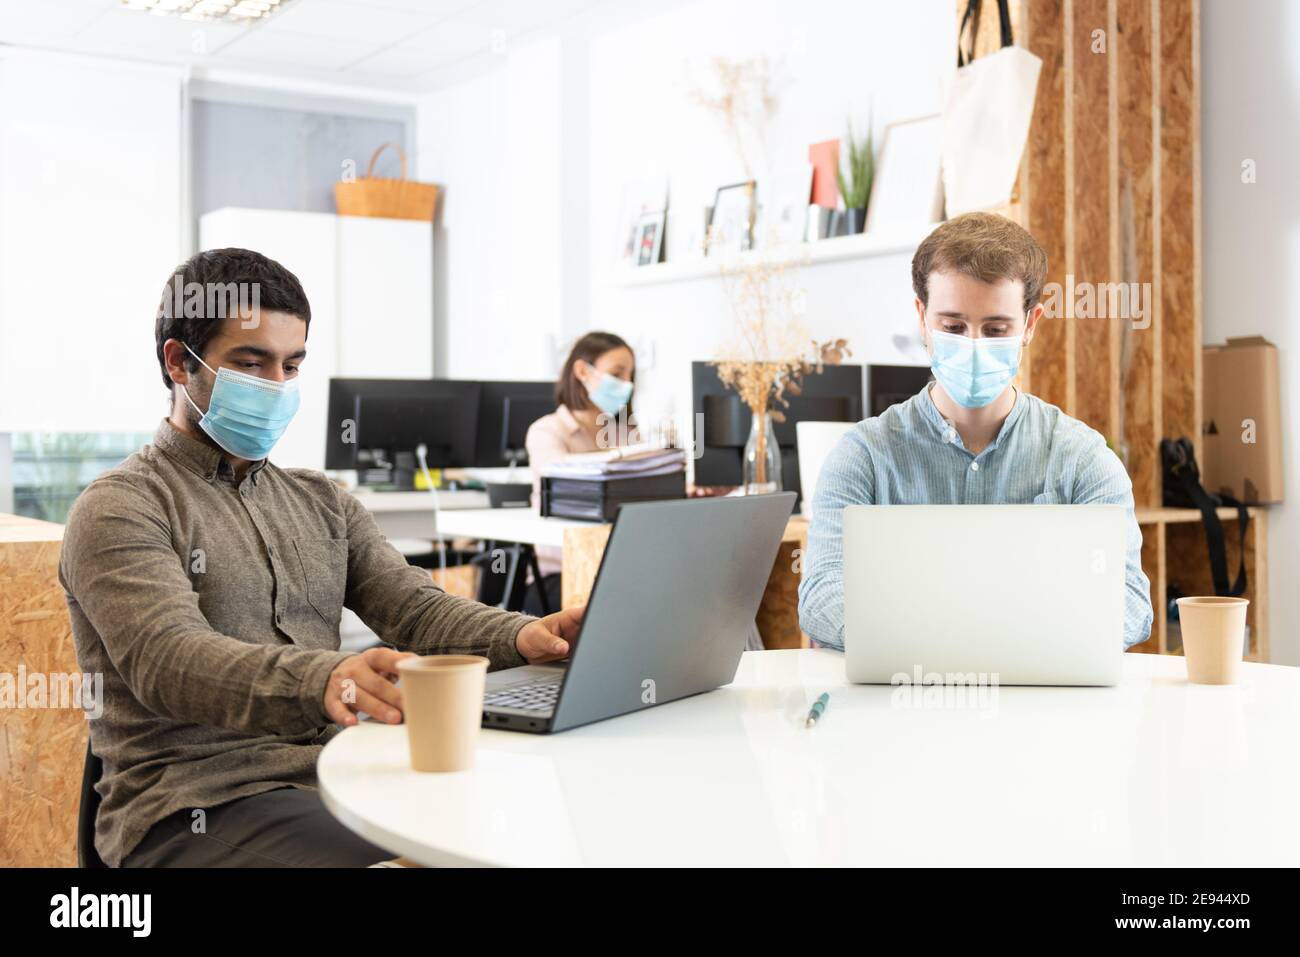 Coworkers concentrated on their laptops and wearing protective face masks. Working in the office during Coronavirus pandemic concept. Stock Photo